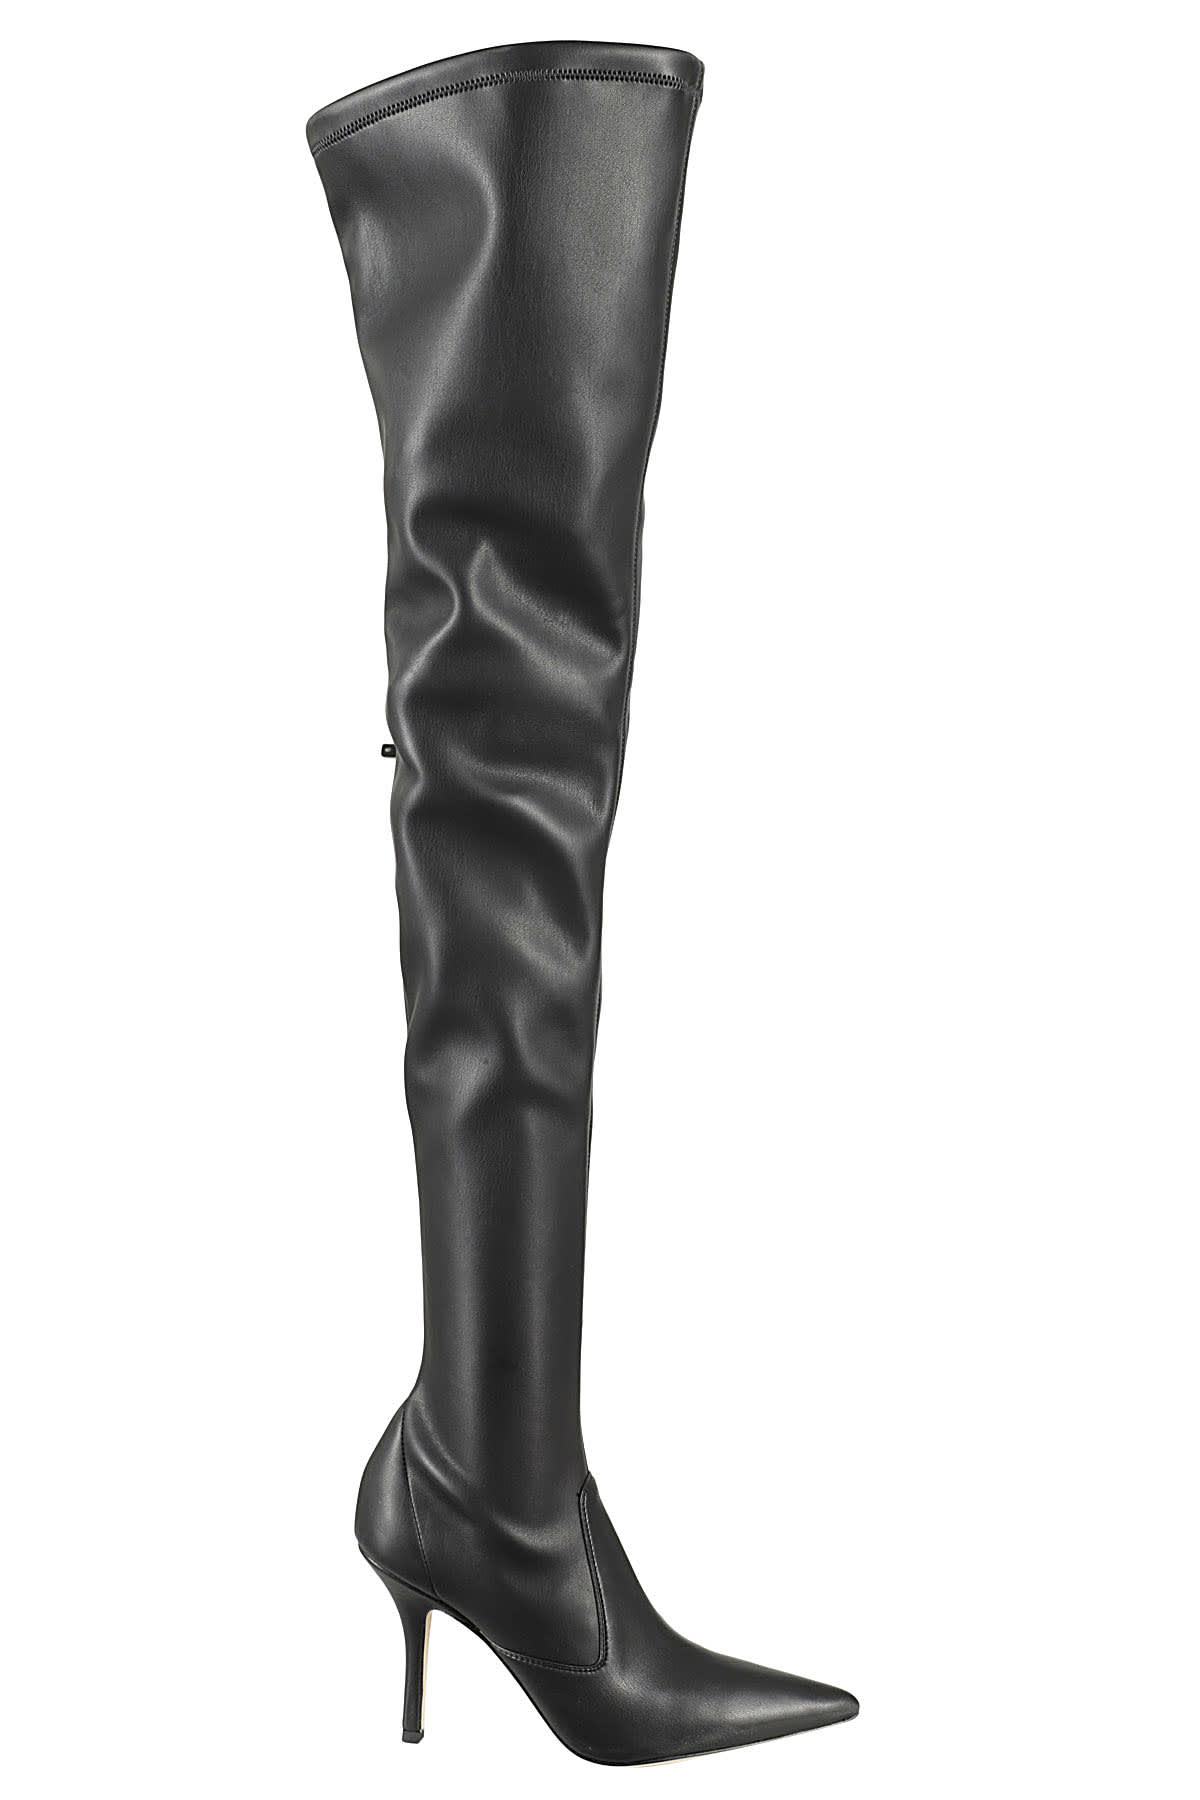 Paris Texas Mama Over The Knee Boot Stretch In Black